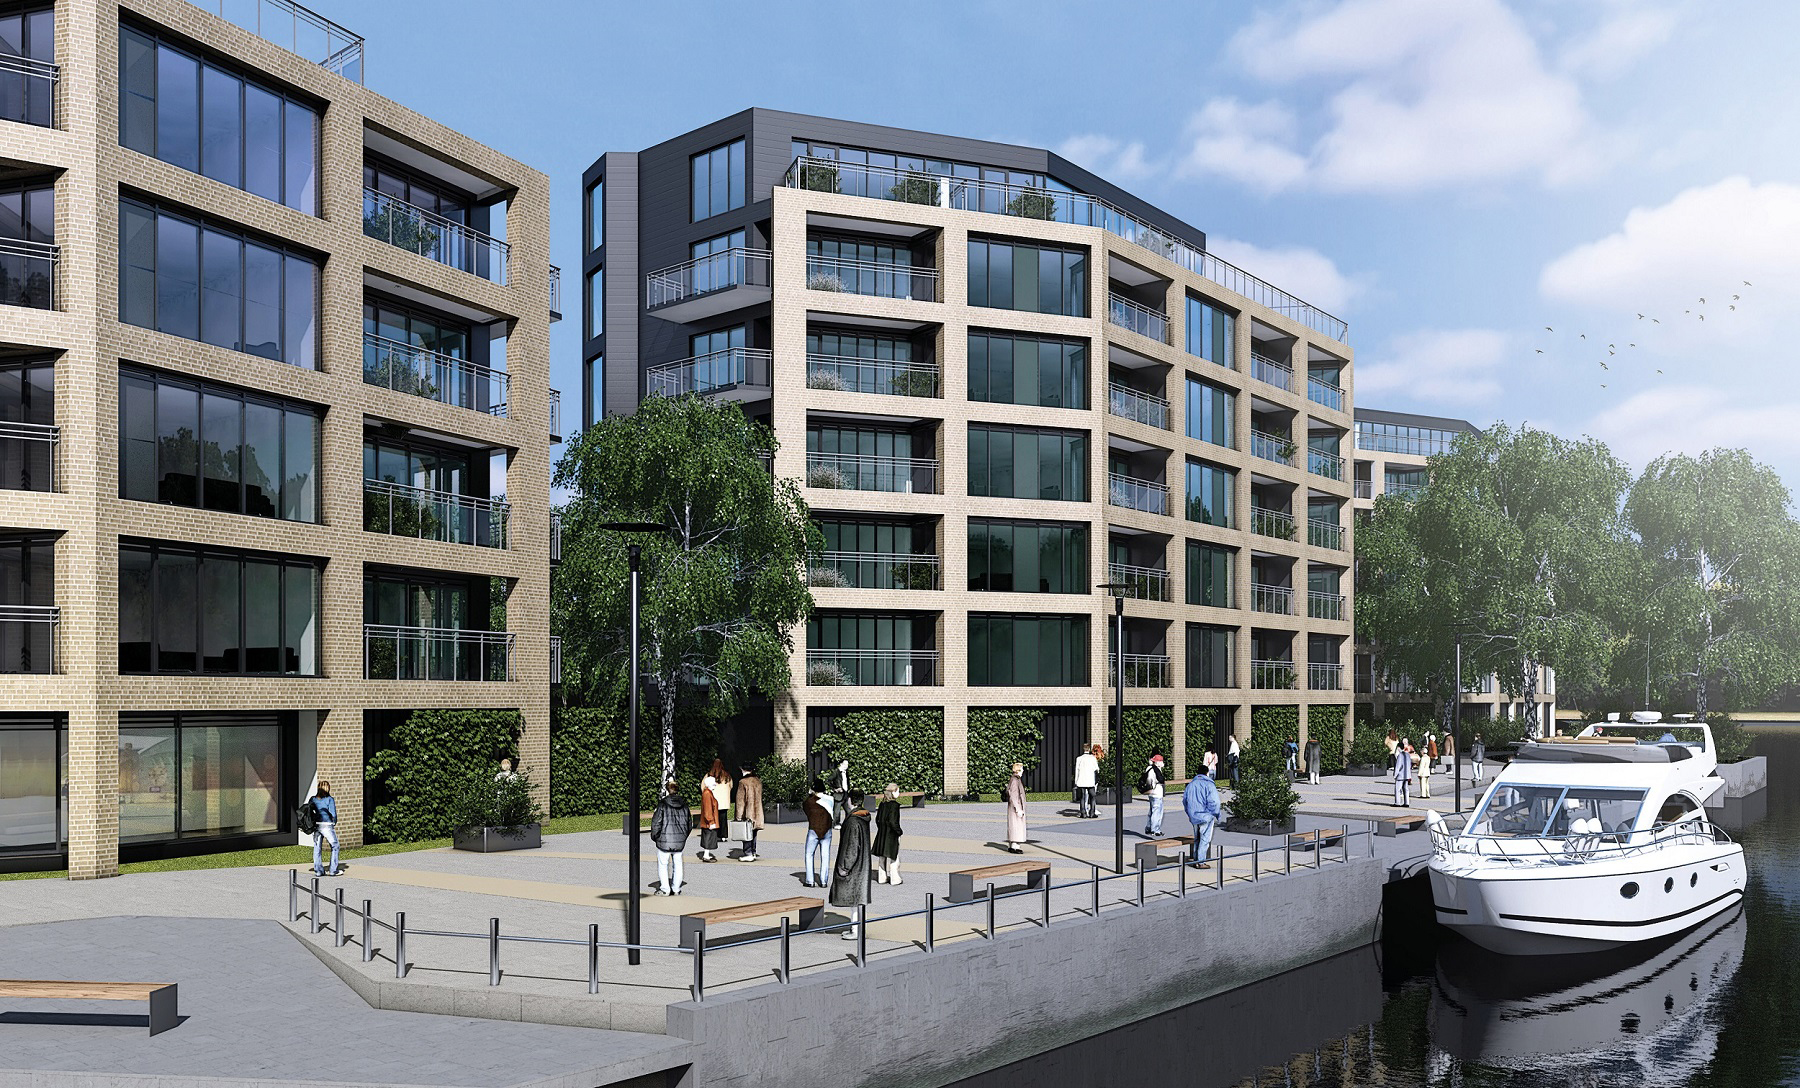 KMRE purchases site for £25m development on River Trent